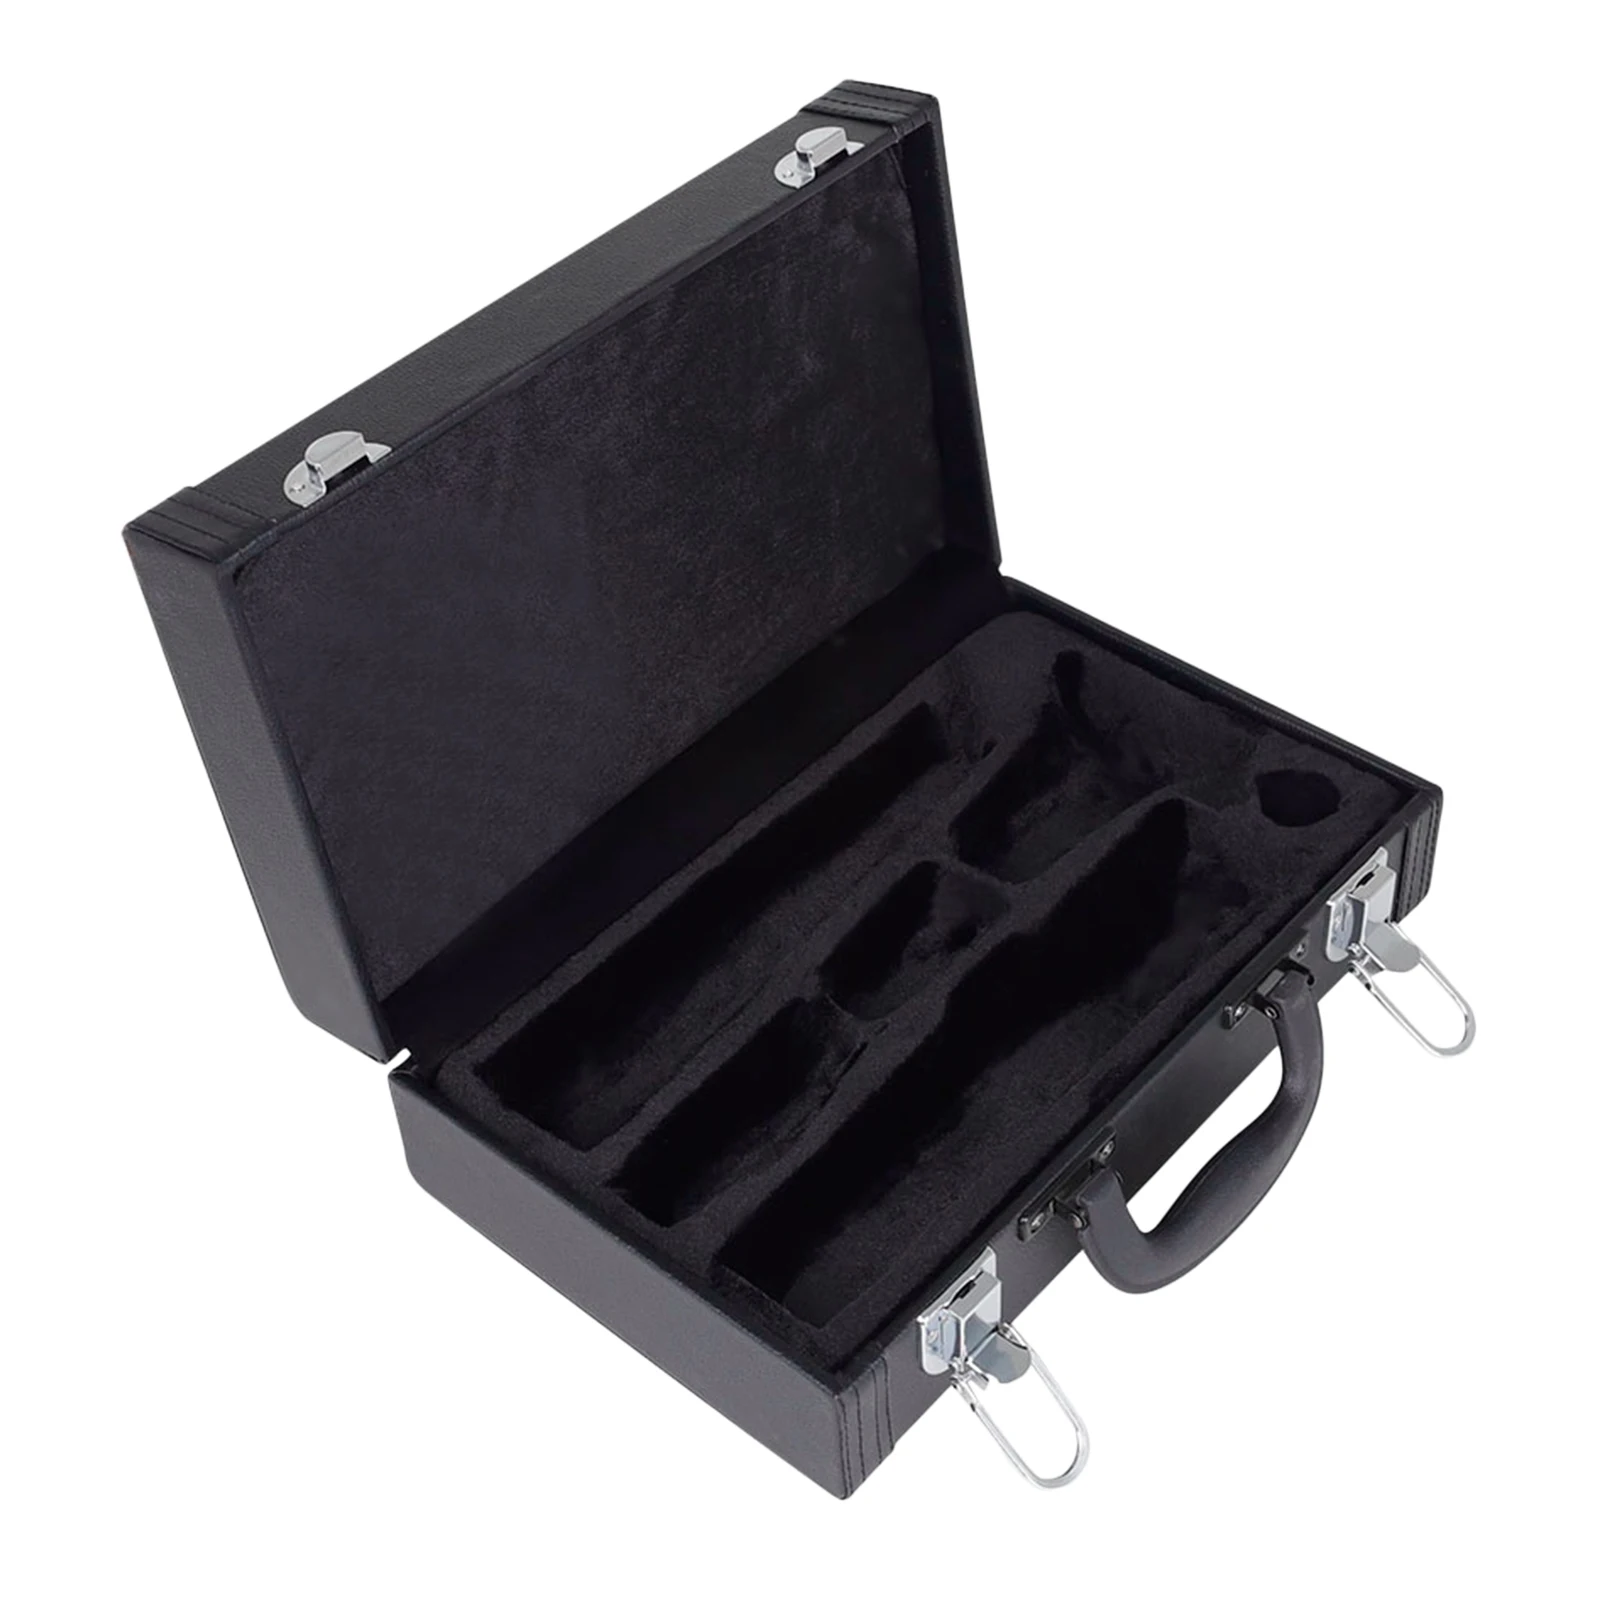 

Clarinet Storage Case Black Tube Padded Box Shockproof Easy Grip Dustproof Instruments Accessory Carrying Bag